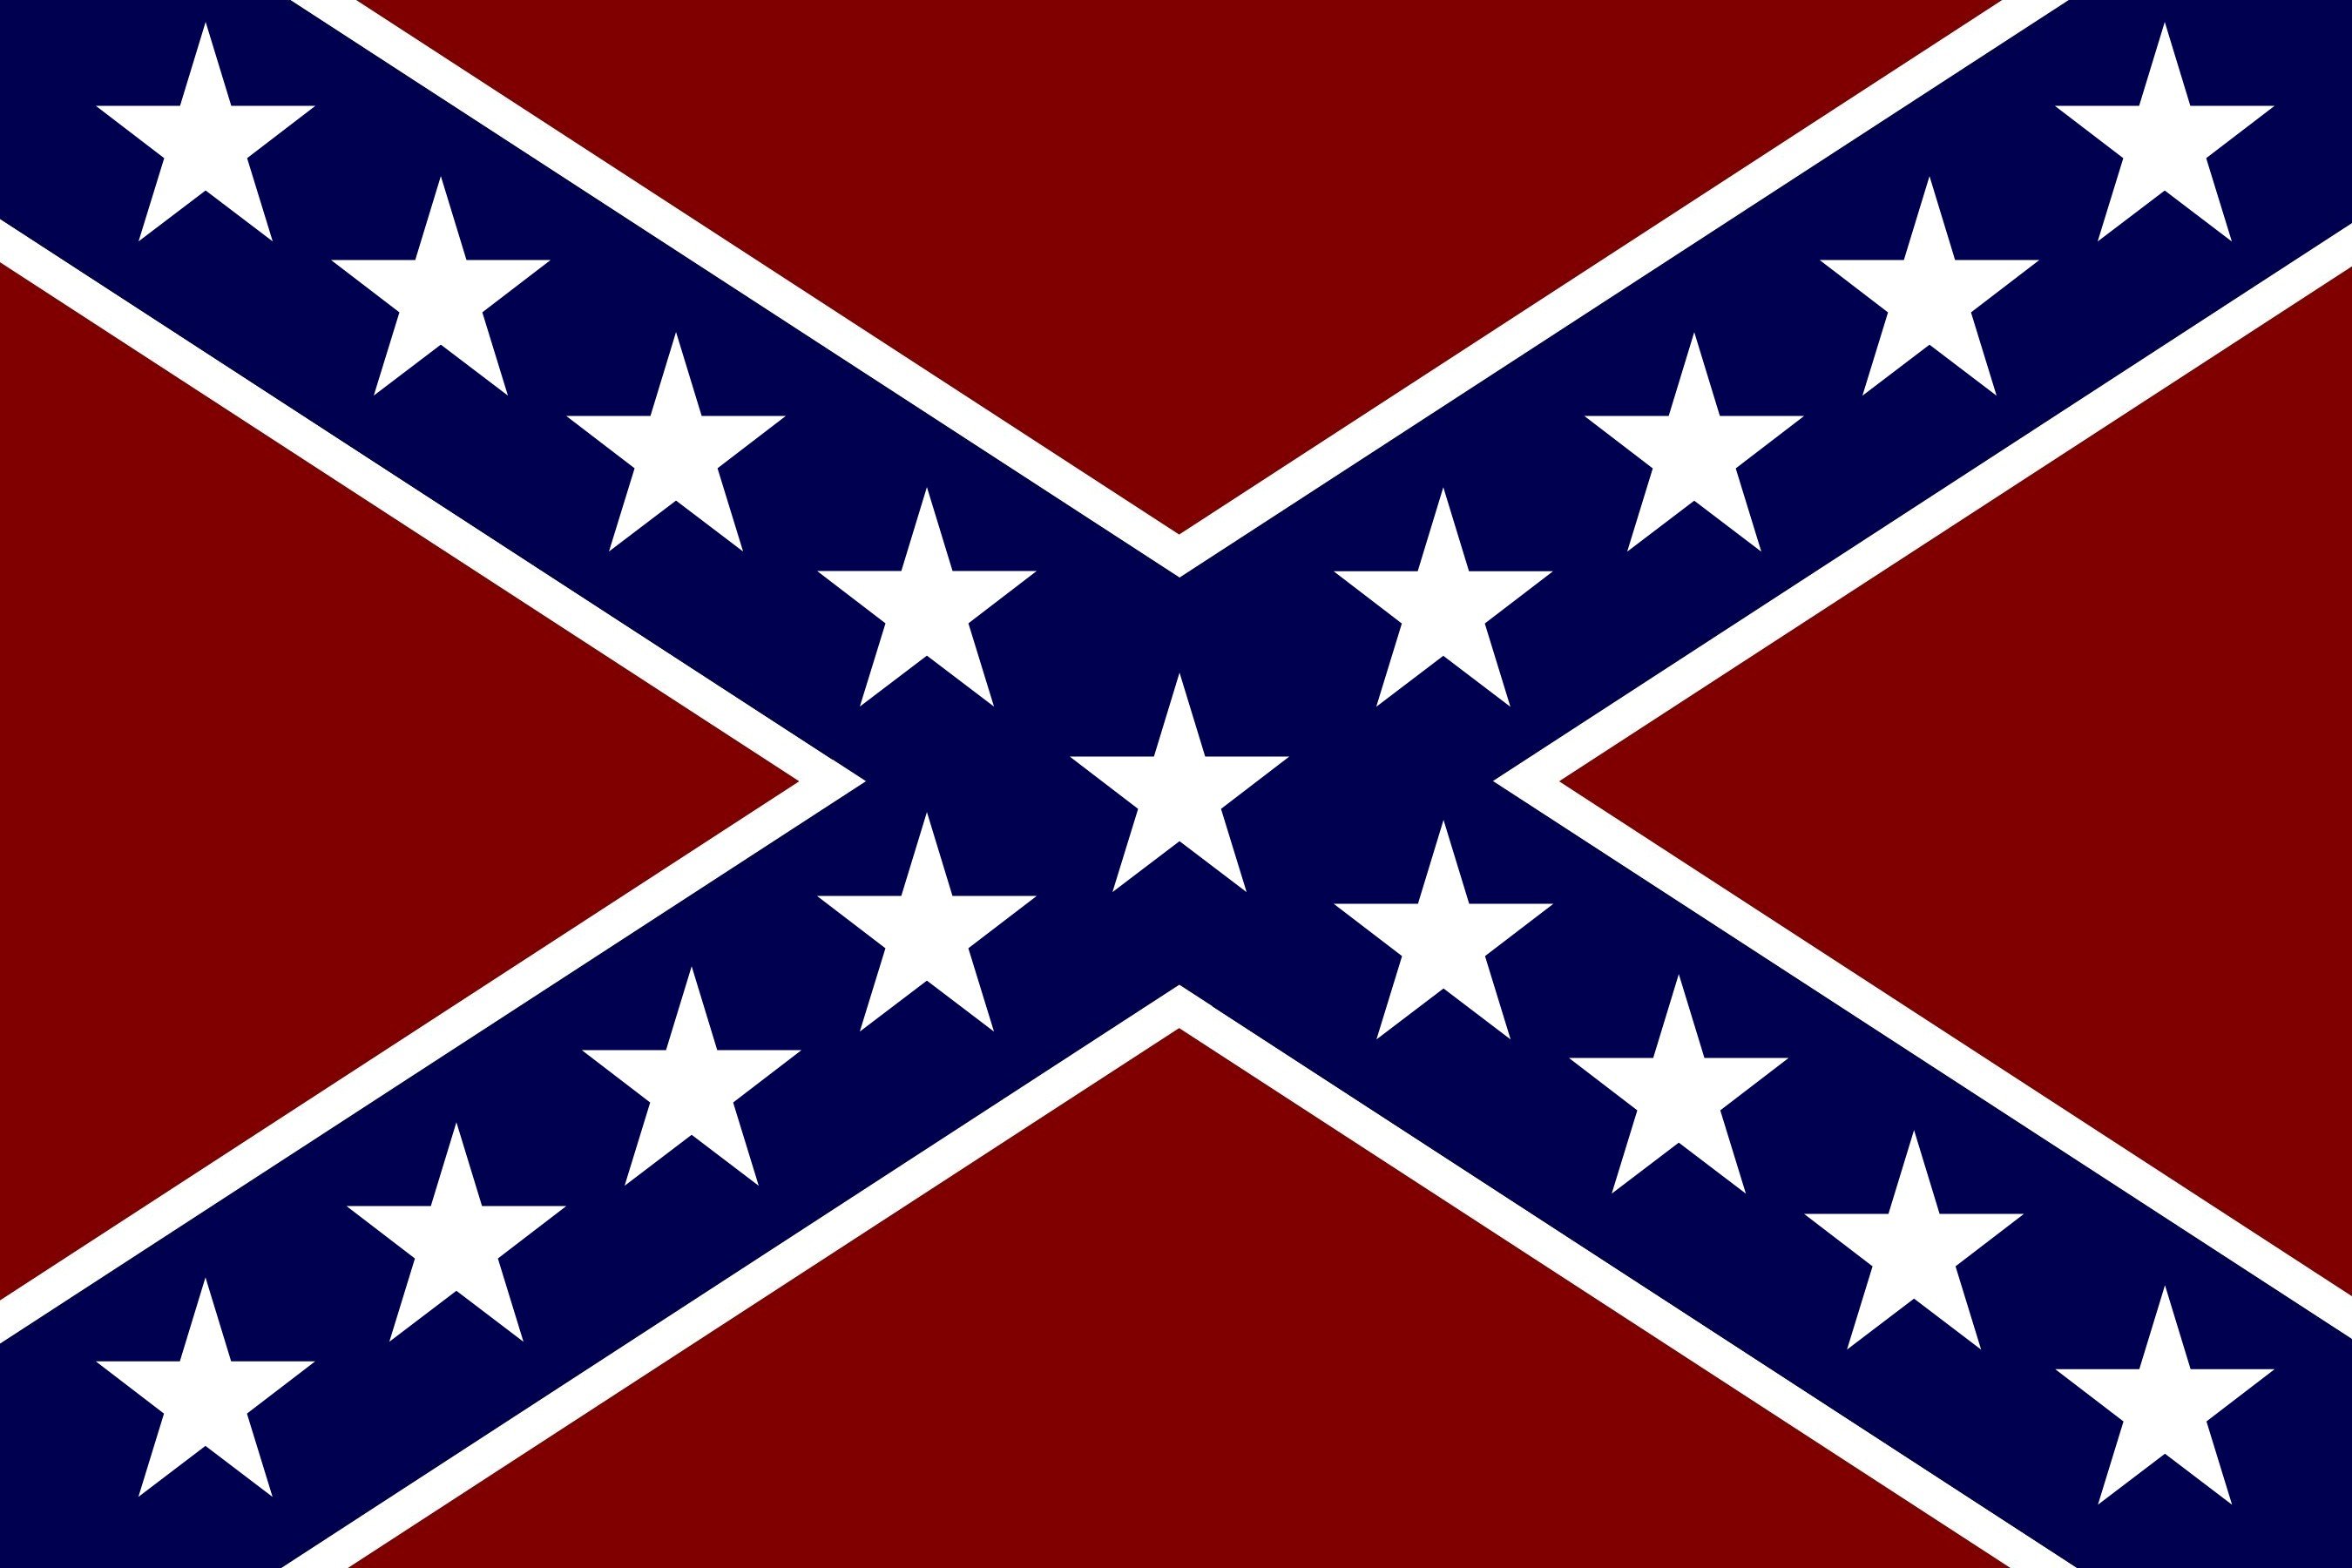 Free Rebel Flag Backgrounds Download | Wallpapers, Backgrounds ...